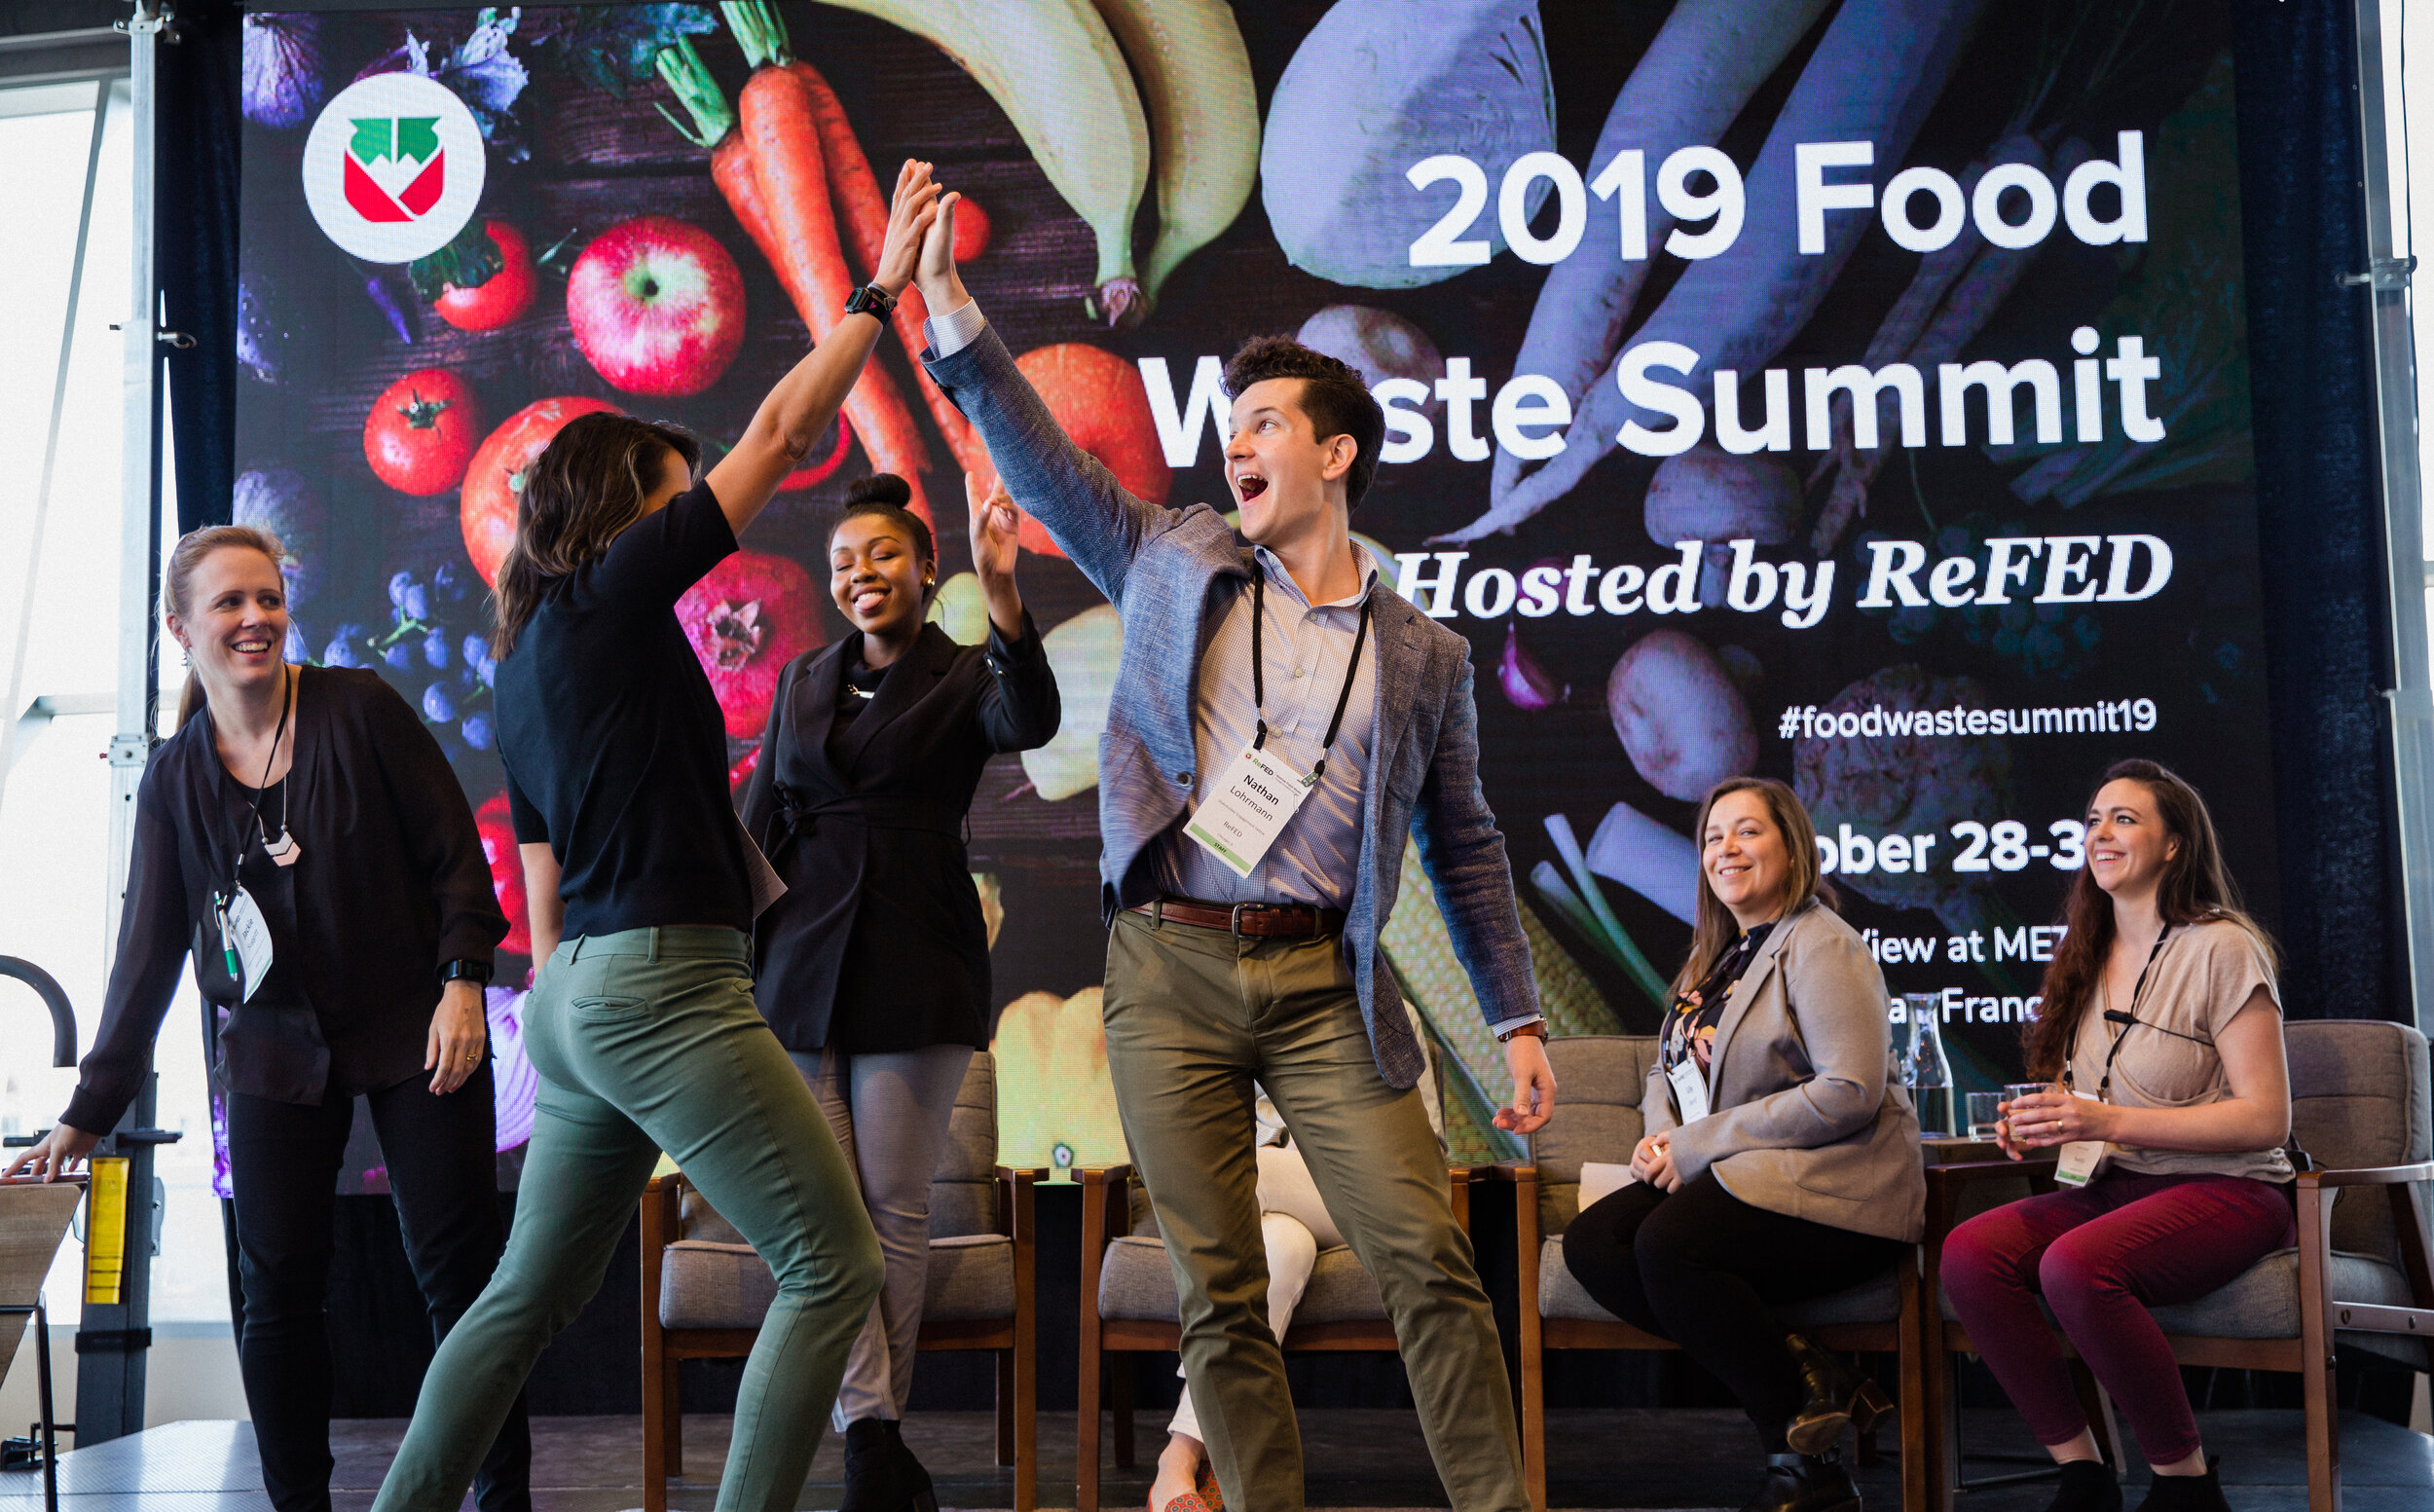  ReFED’s annual Food Waste Summit paves the path to progress by bringing together stakeholders to unlock the $100 billion+ opportunity to reduce food waste in half by 2030 